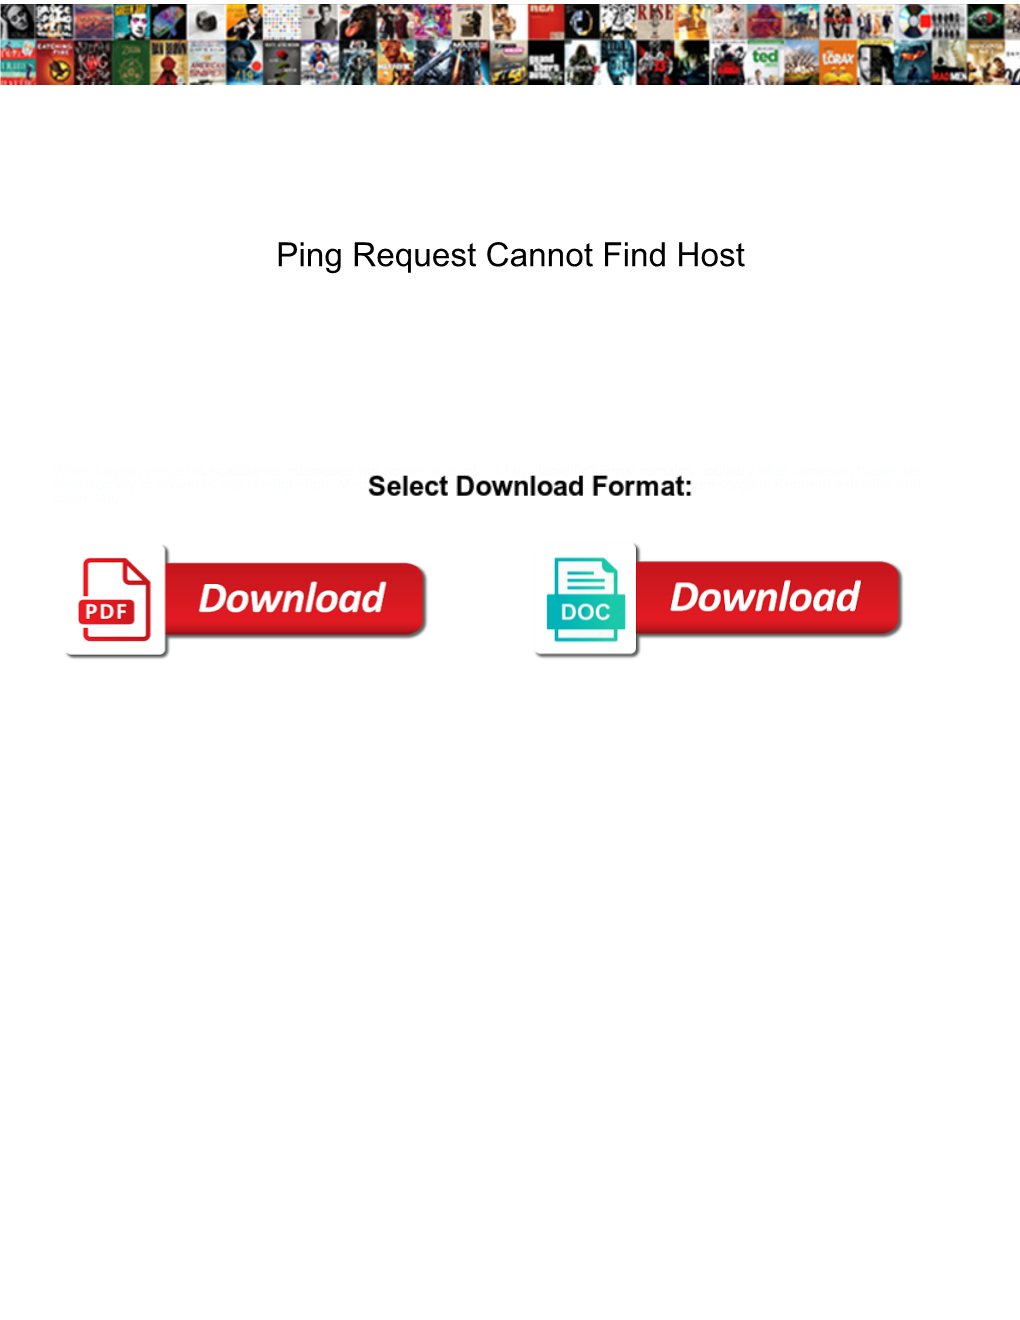 Ping Request Cannot Find Host